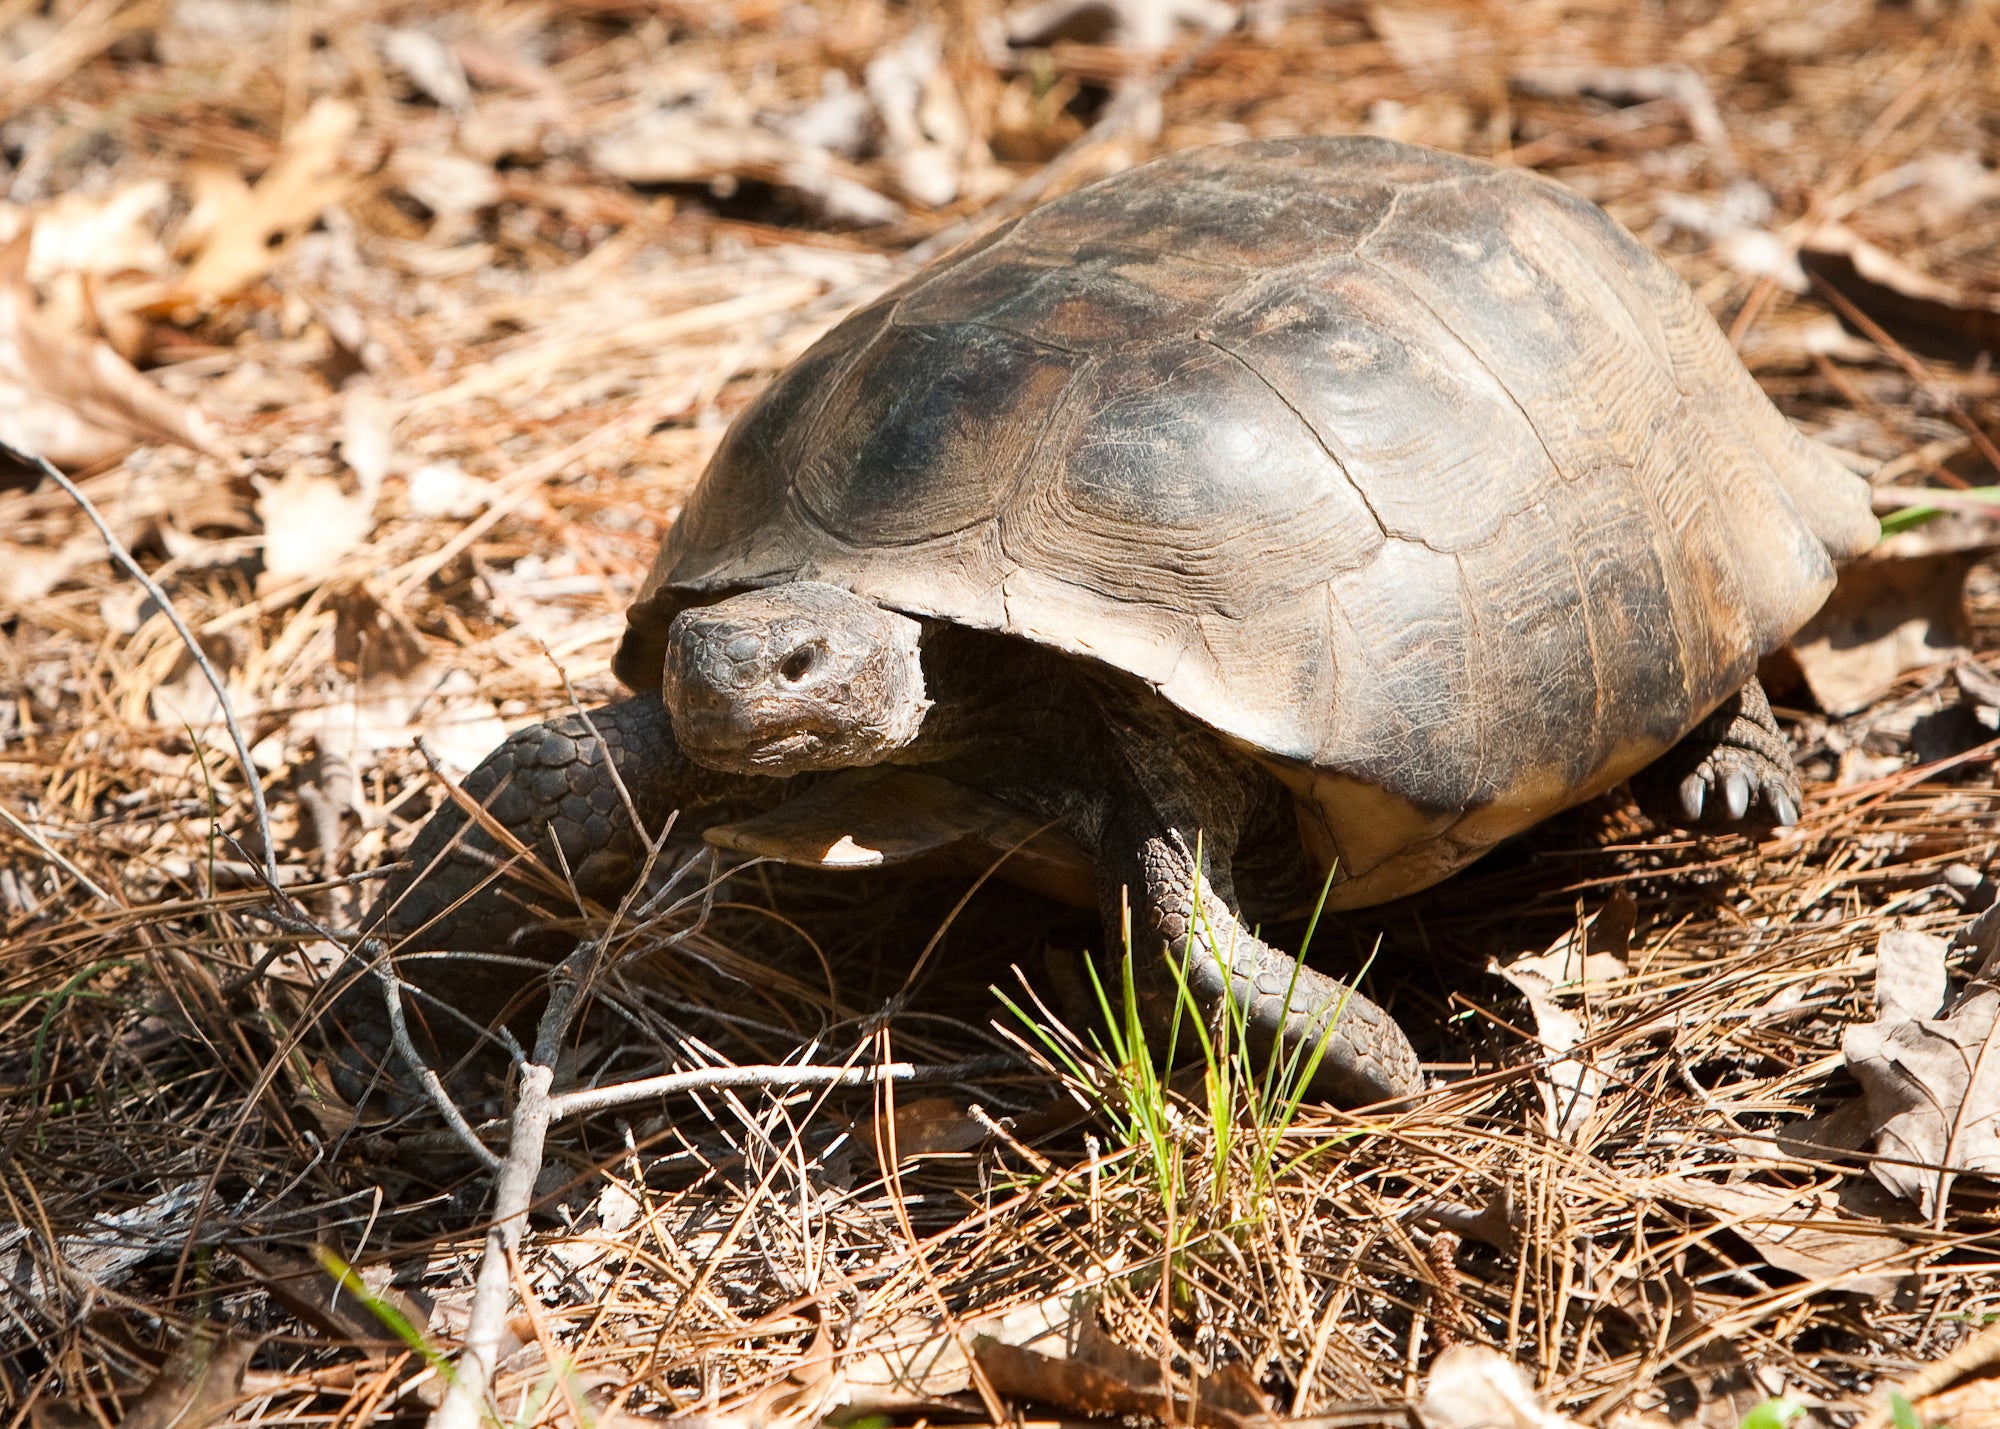 Gopher tortoise photo by Billy Pope, ADCNR